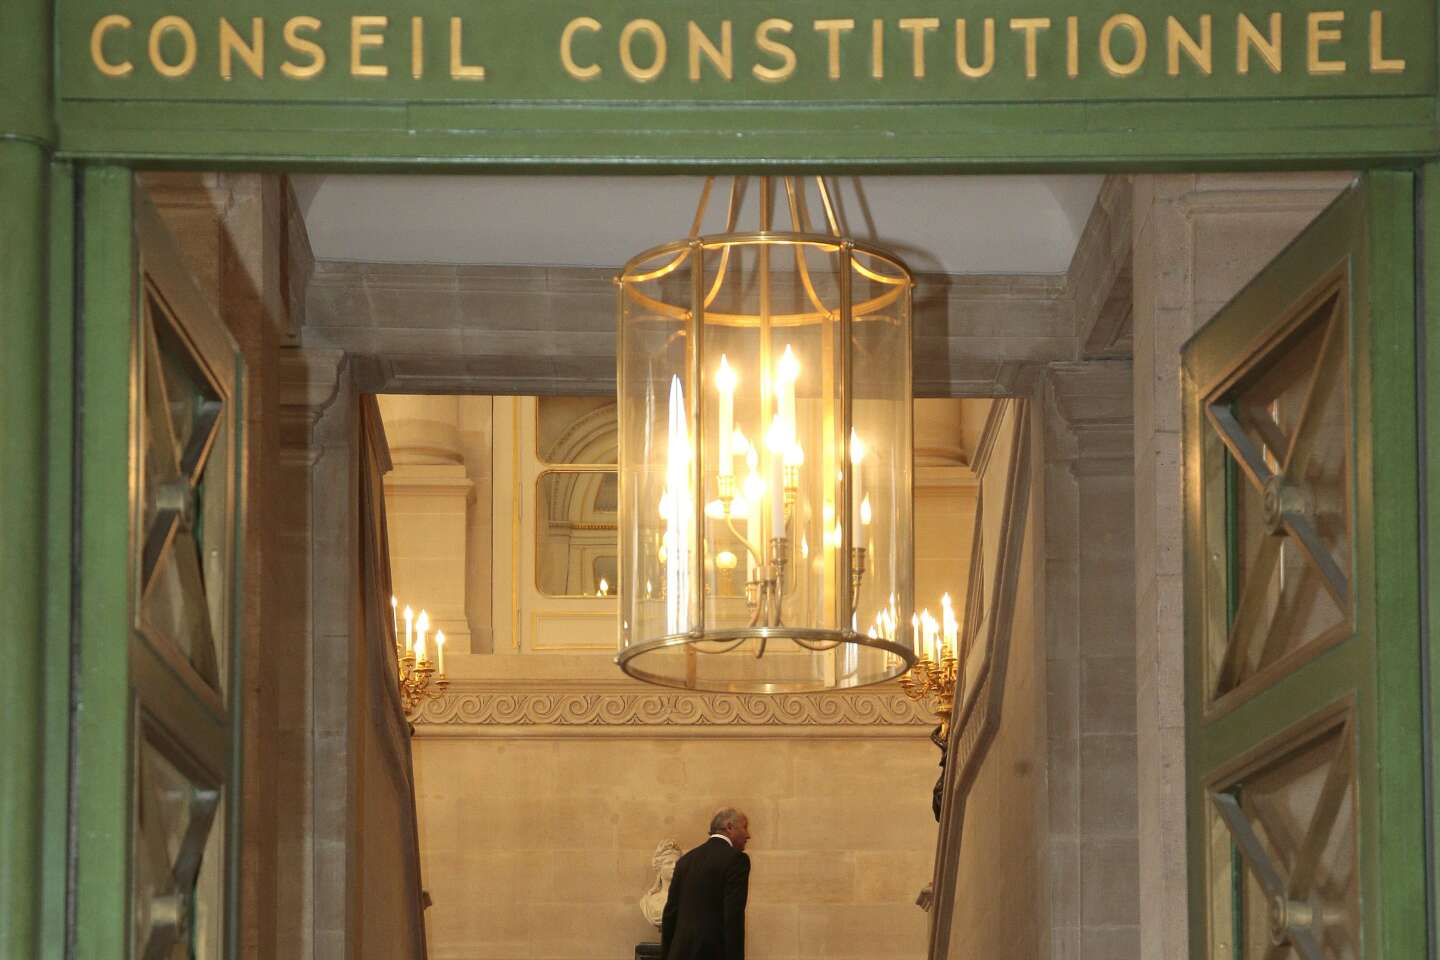 “A global censorship of the pension reform by the Constitutional Council is unlikely”